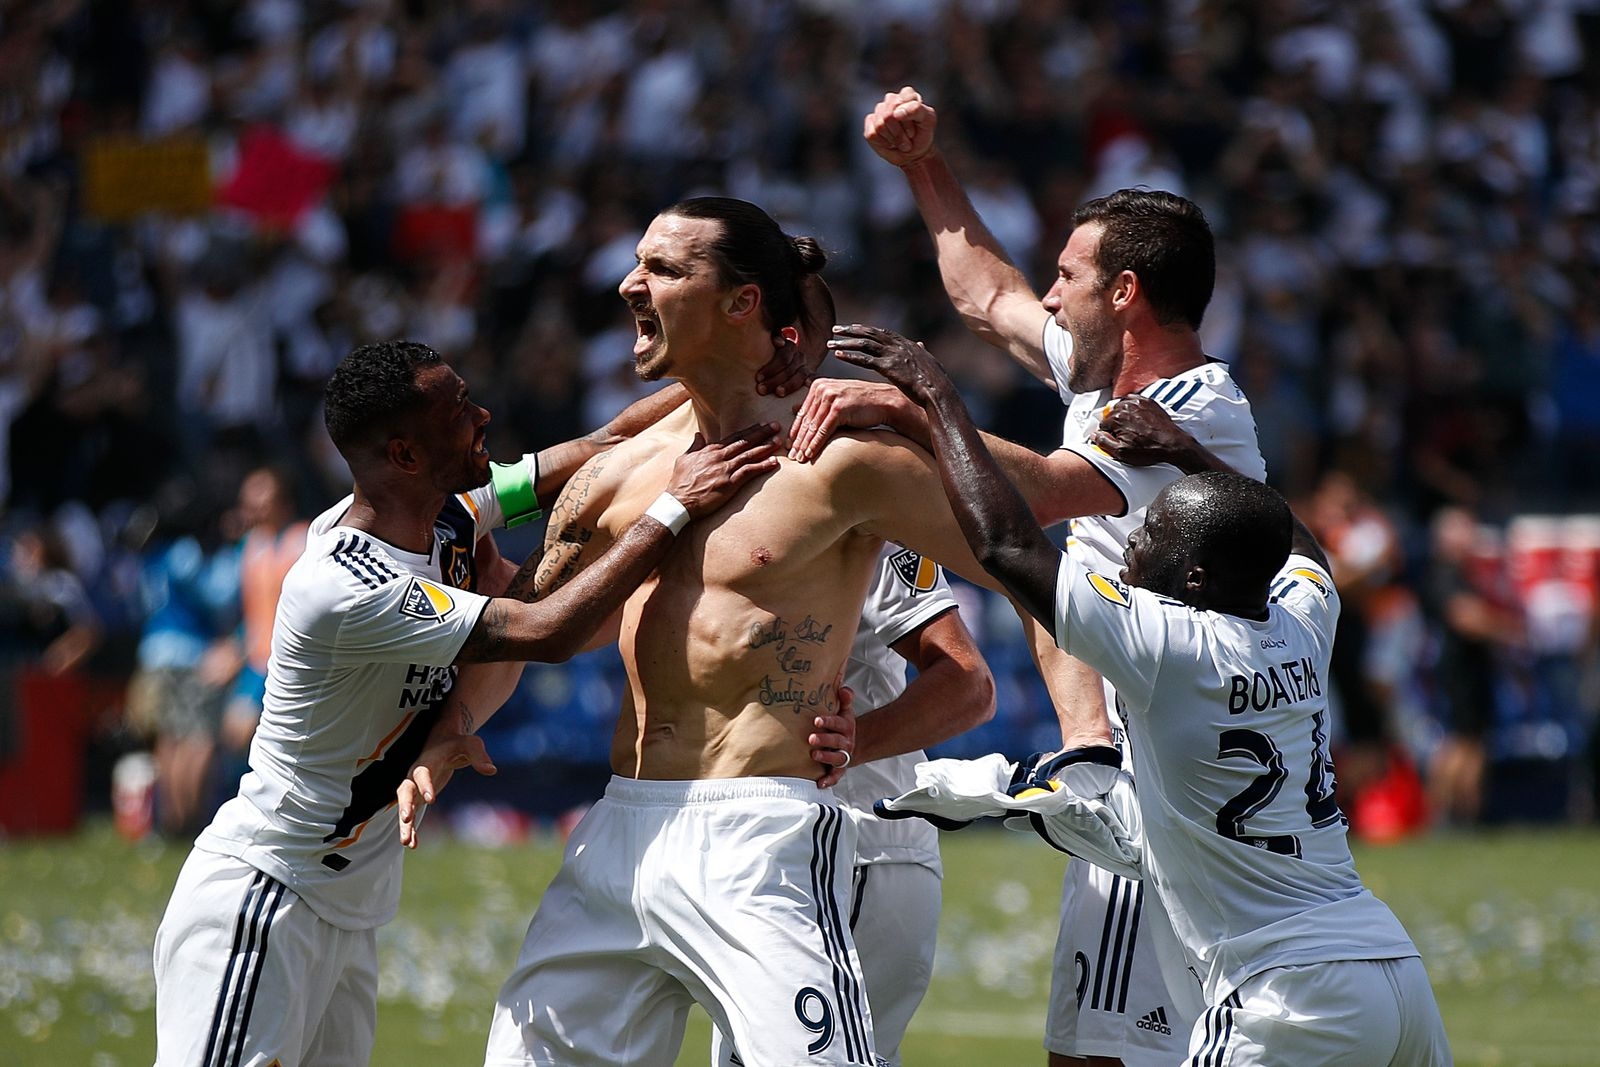 Los Angeles Galaxy's Zlatan Ibrahimovic, center, of Sweden, and teammates celebrate a goal by Ibrahimovic during the second half of an MLS soccer match against the Los Angeles FC Saturday, March 31, 2018, in Carson, Calif. The Galaxy won 4-3. (AP Photo/Jae C. Hong)